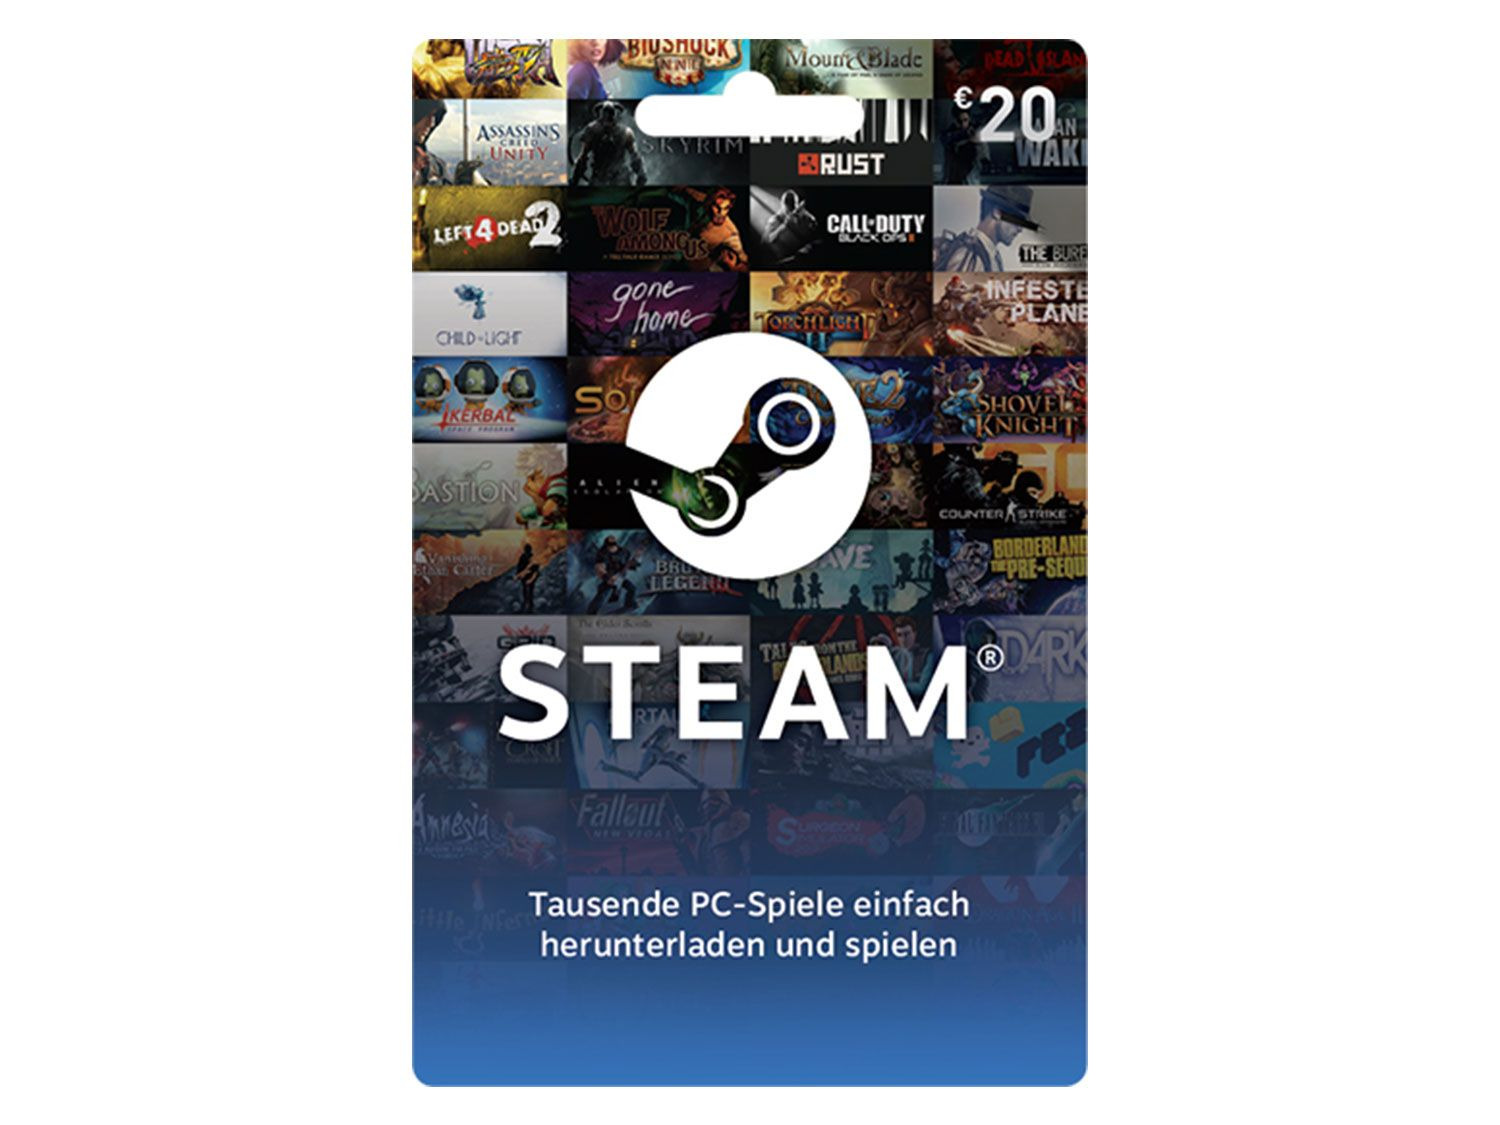 Value my steam фото 66